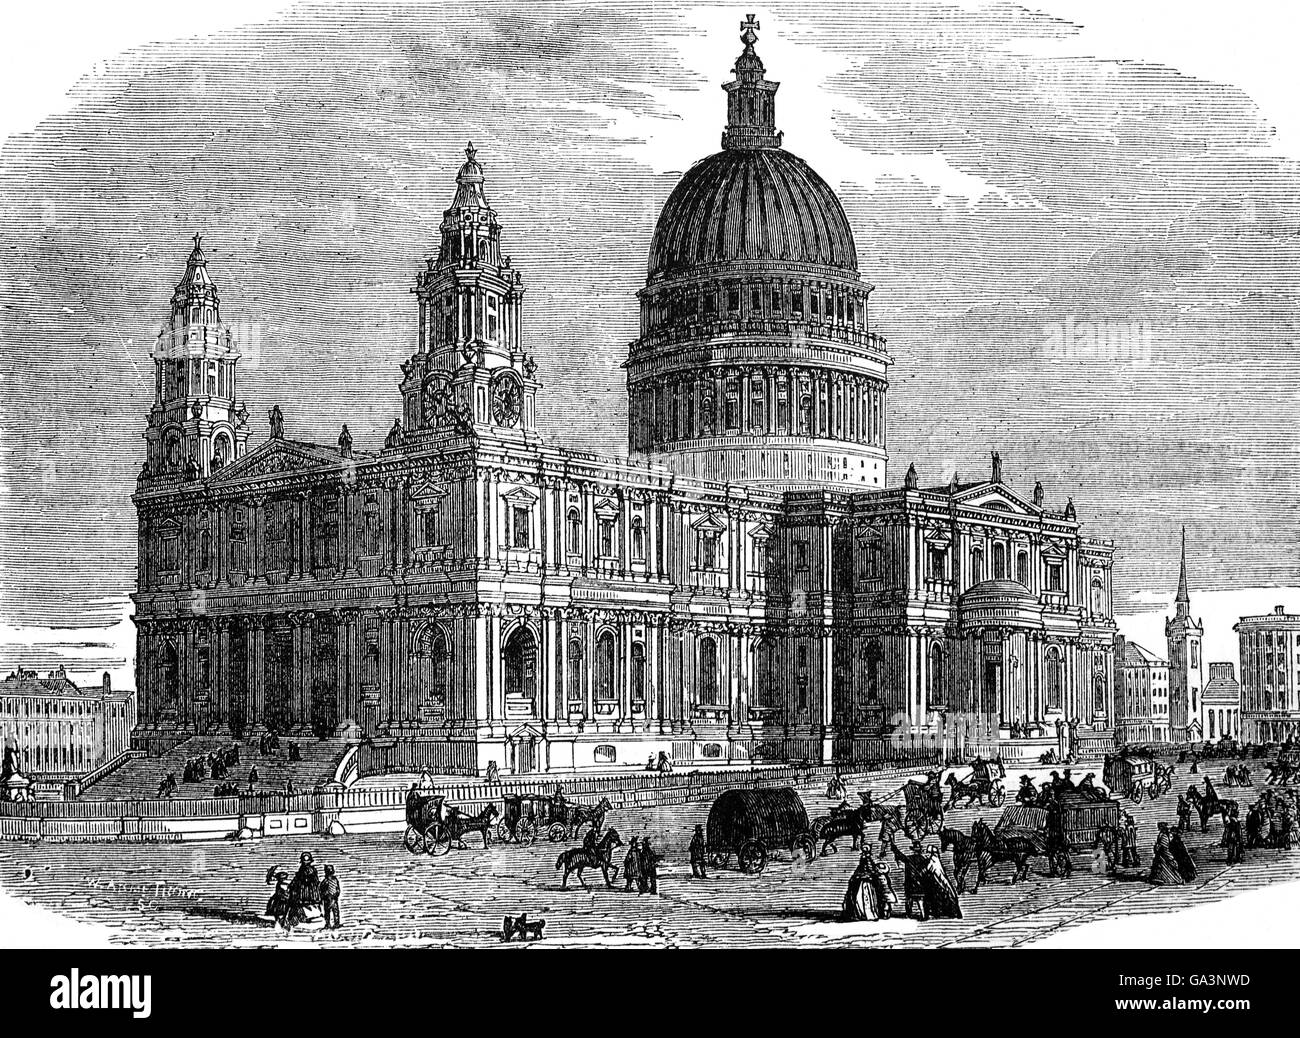 18th Century view of St Paul's Anglican Cathedral, London, the seat of the Bishop of London and the mother church of the Diocese of London. It sits on Ludgate Hill at the highest point of the City of London. Stock Photo